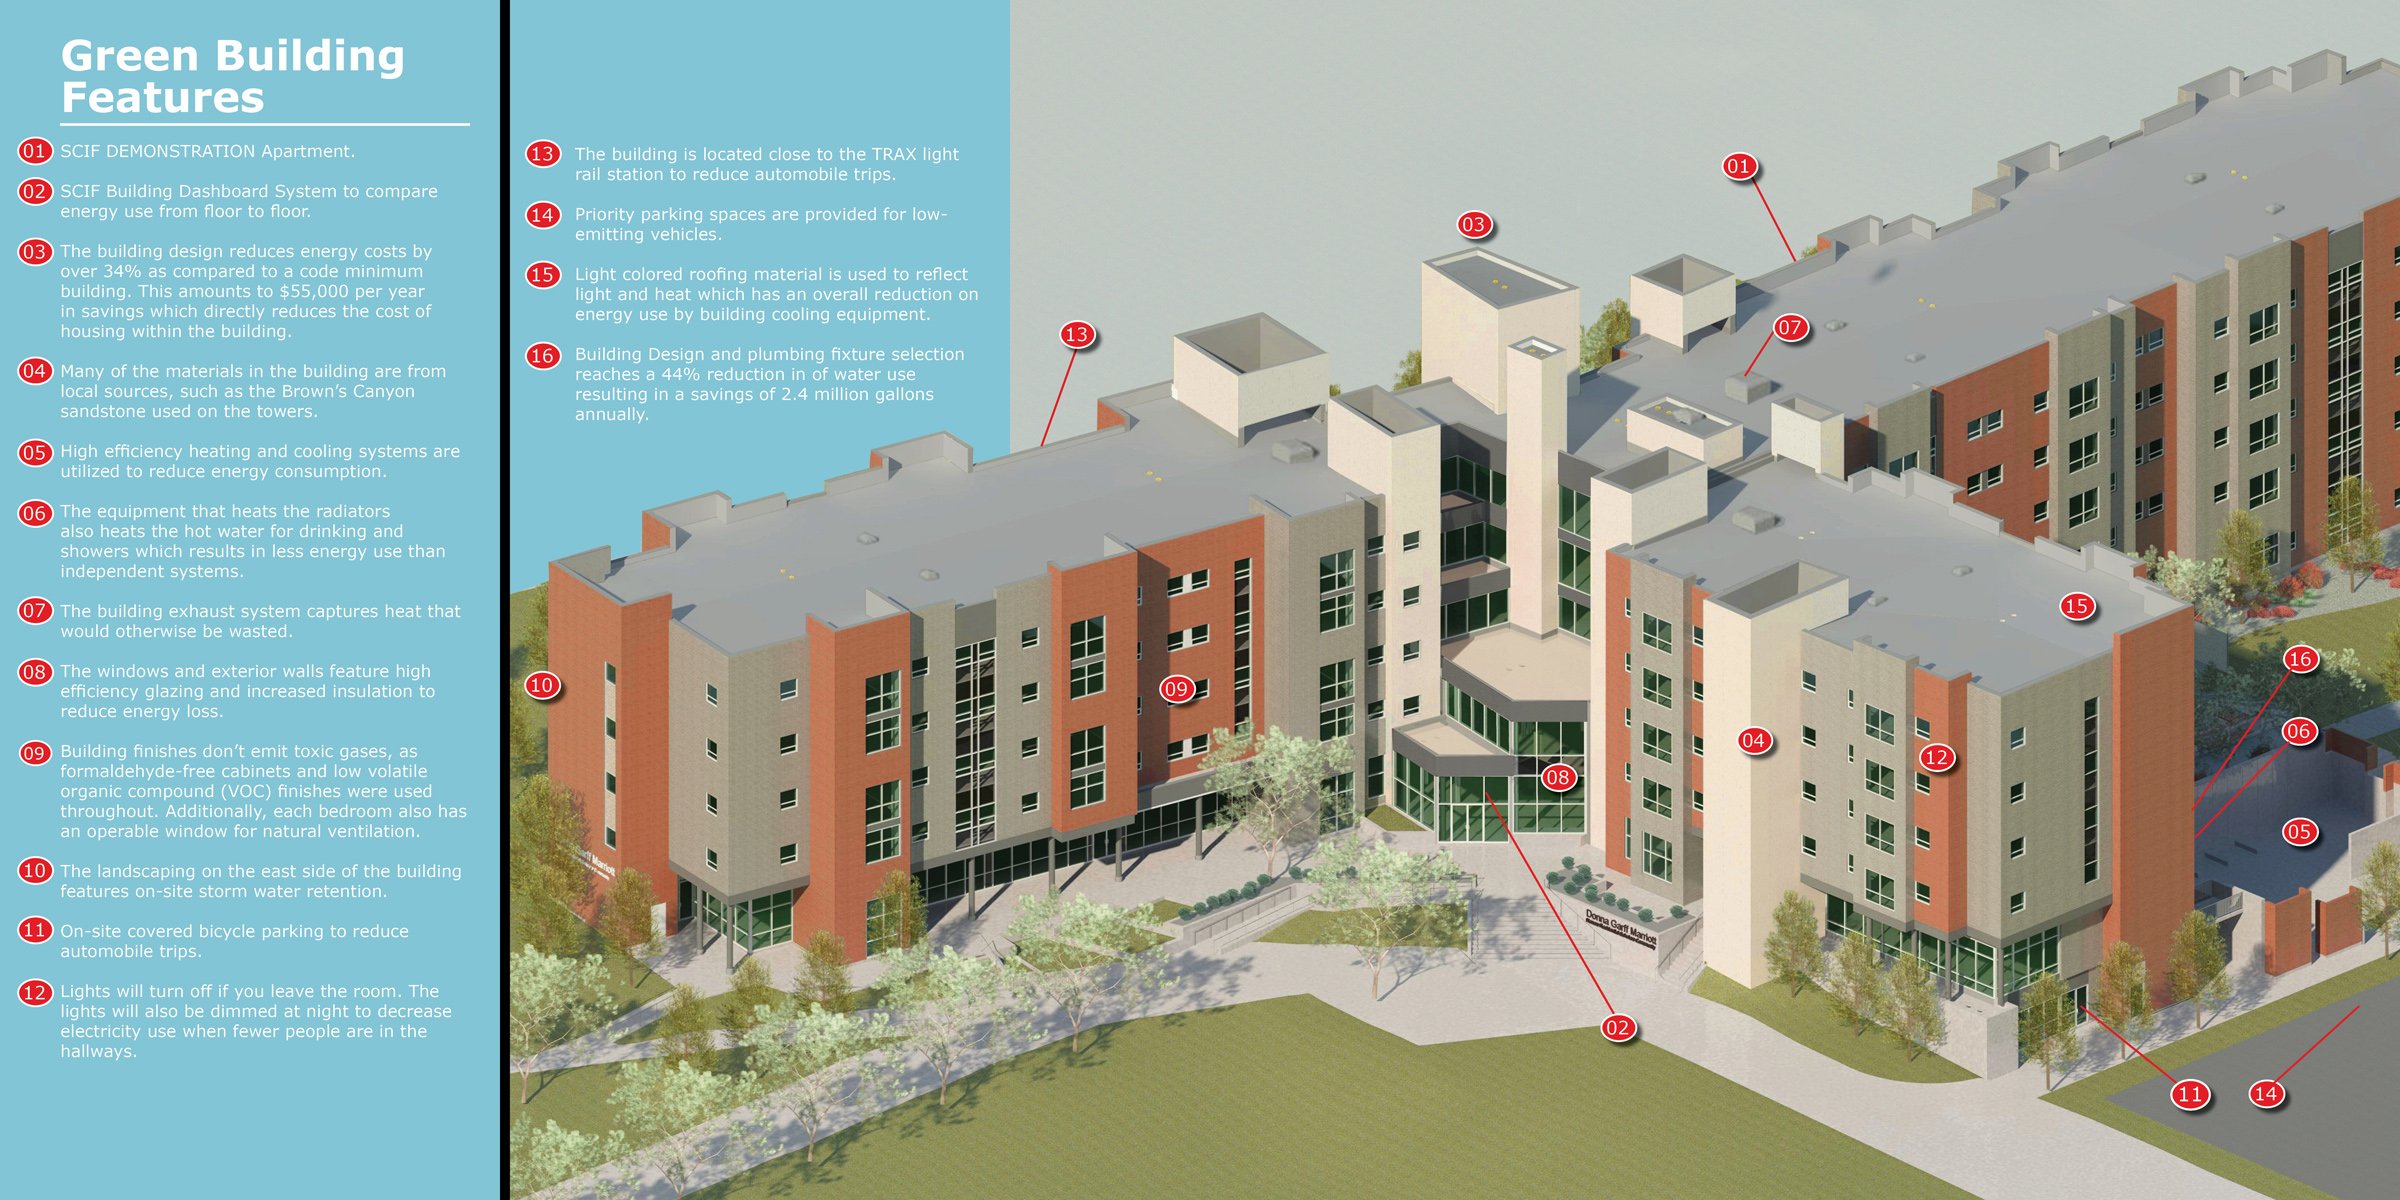 The U’s newest residential building exceeded minimum energy efficiency standards by more than 30%, which results in $55,000 annual savings. This infographic points out several sustainable features of the building.